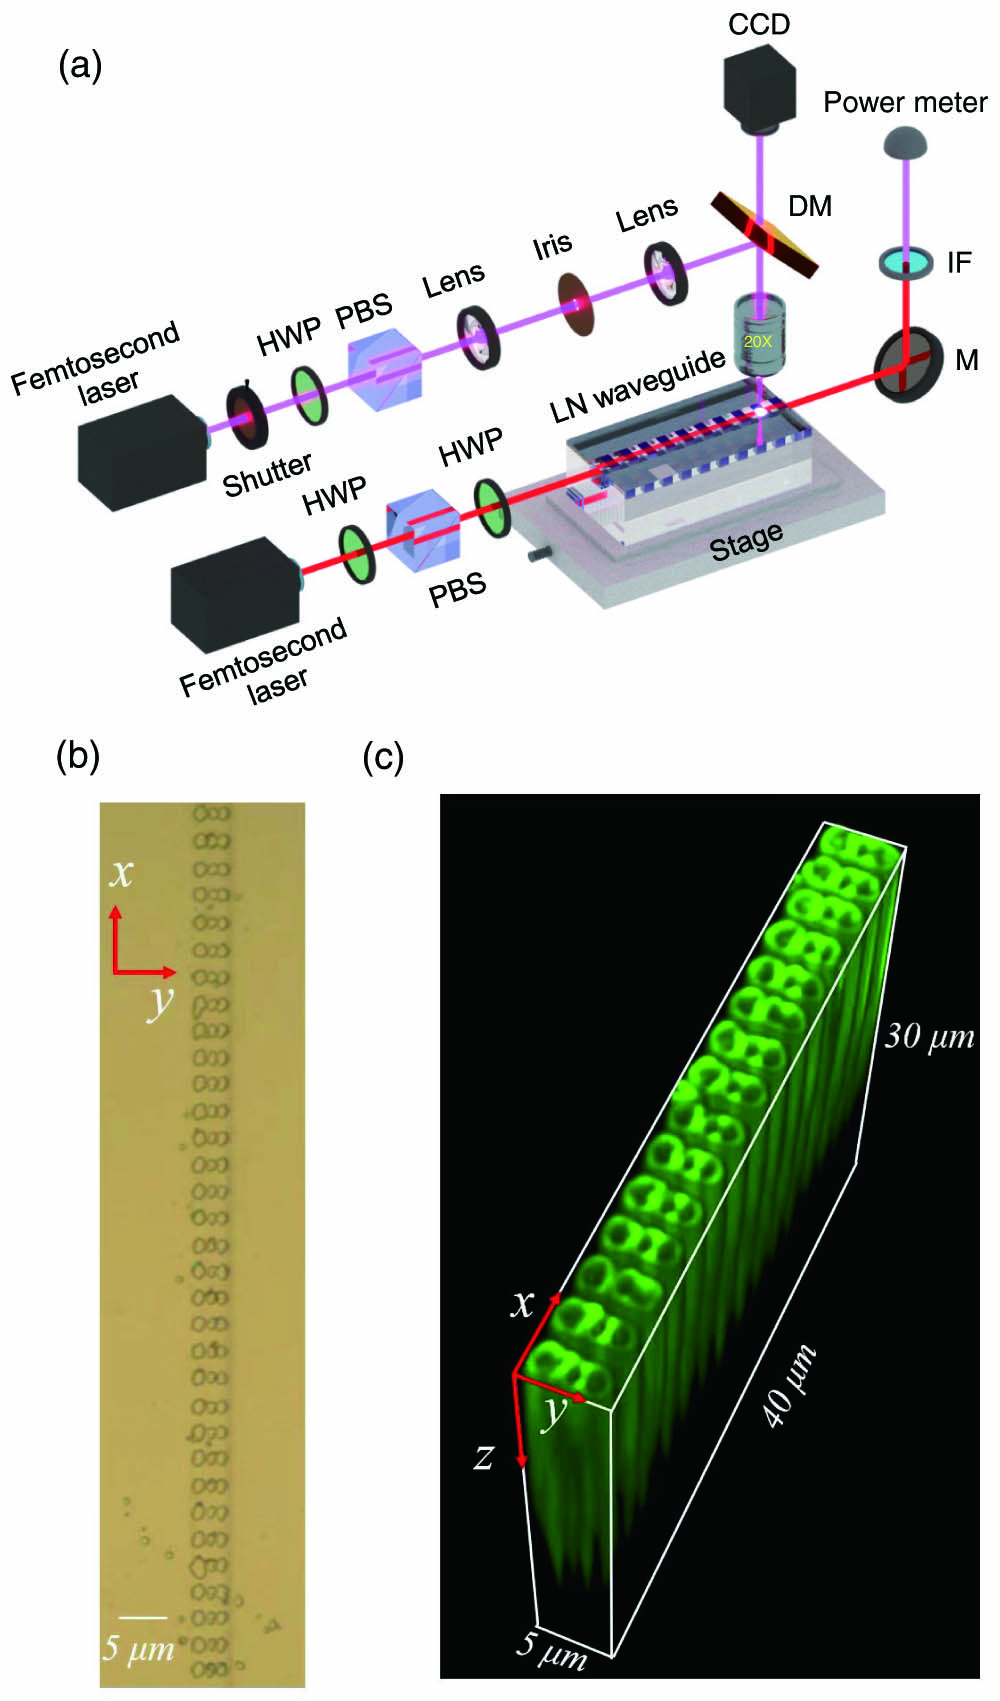 (a) Experimental setup for femtosecond laser direct writing ferroelectric domain patterns in the Ti-indiffused LN channel waveguide. HWP, half-wave plate; PBS, polarizing beam splitter; DM, dichroic mirror; IF, interference filter. (b) Optical microscopic image of the 2D optically poled domain pattern with the period of 2.74 µm in the x direction and 1.15 µm in the y direction. The inverted domains are visible as small circles. (c) 3D profiles of the inverted domains obtained by Cerenkov second-harmonic microscopy.